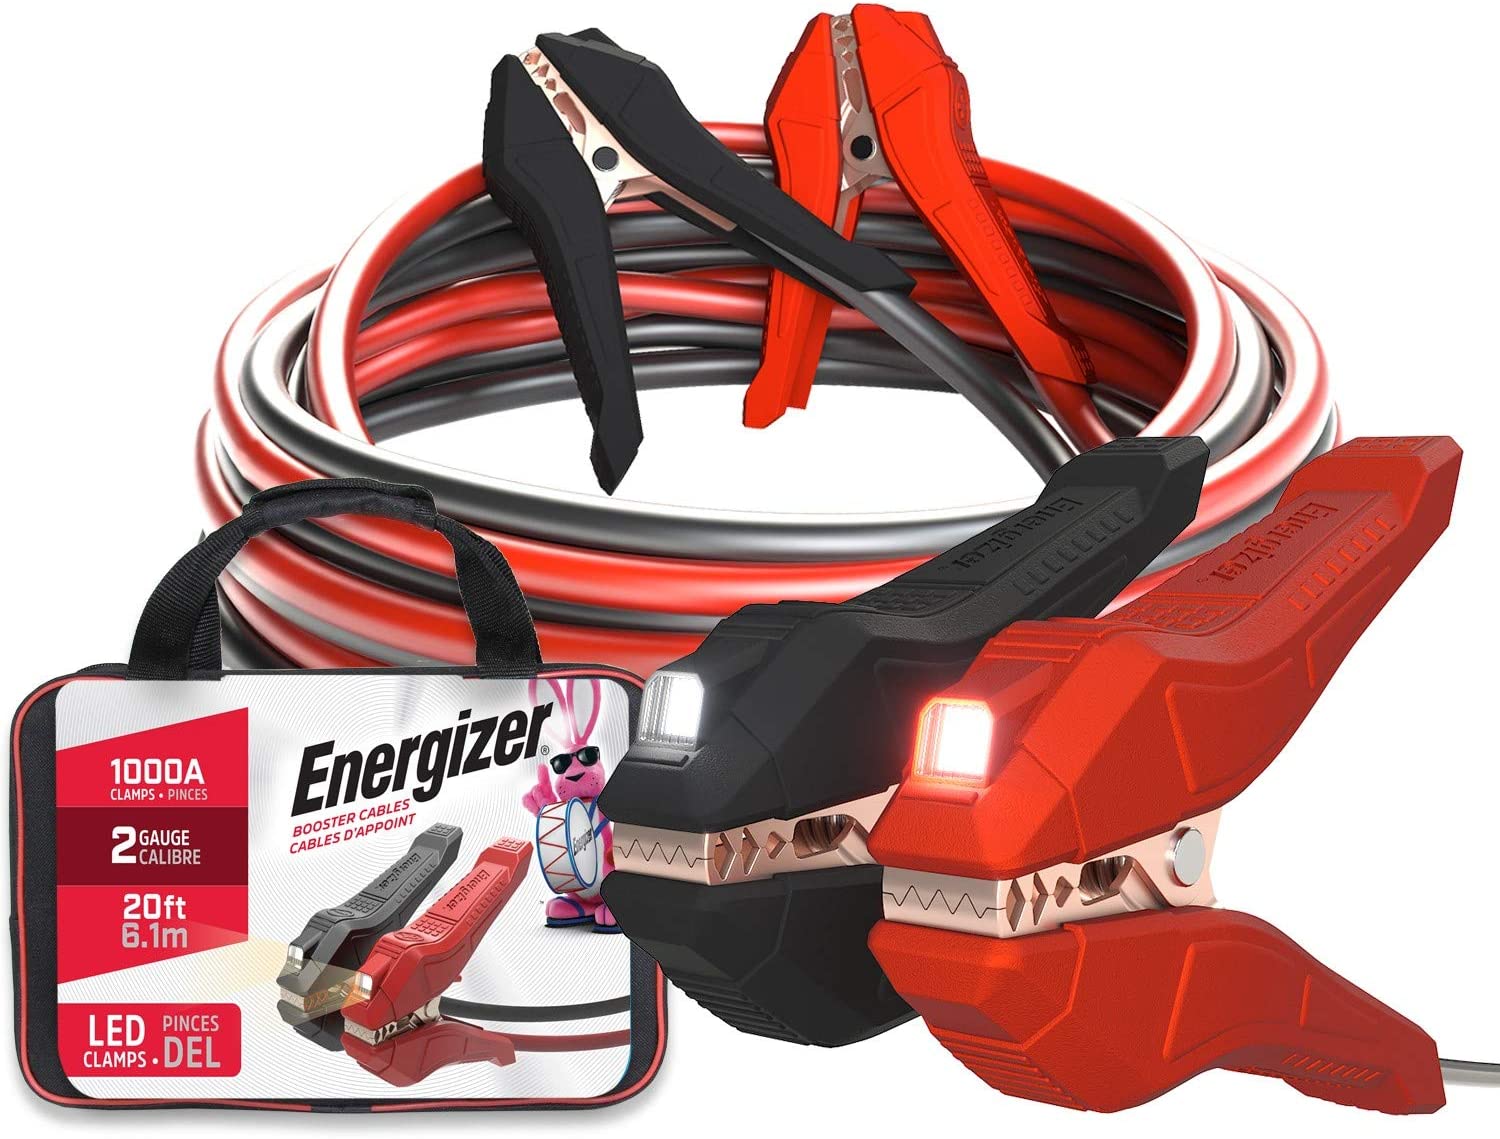 best jumper cables Energizer Jumper Cables with Built-in LED Lights